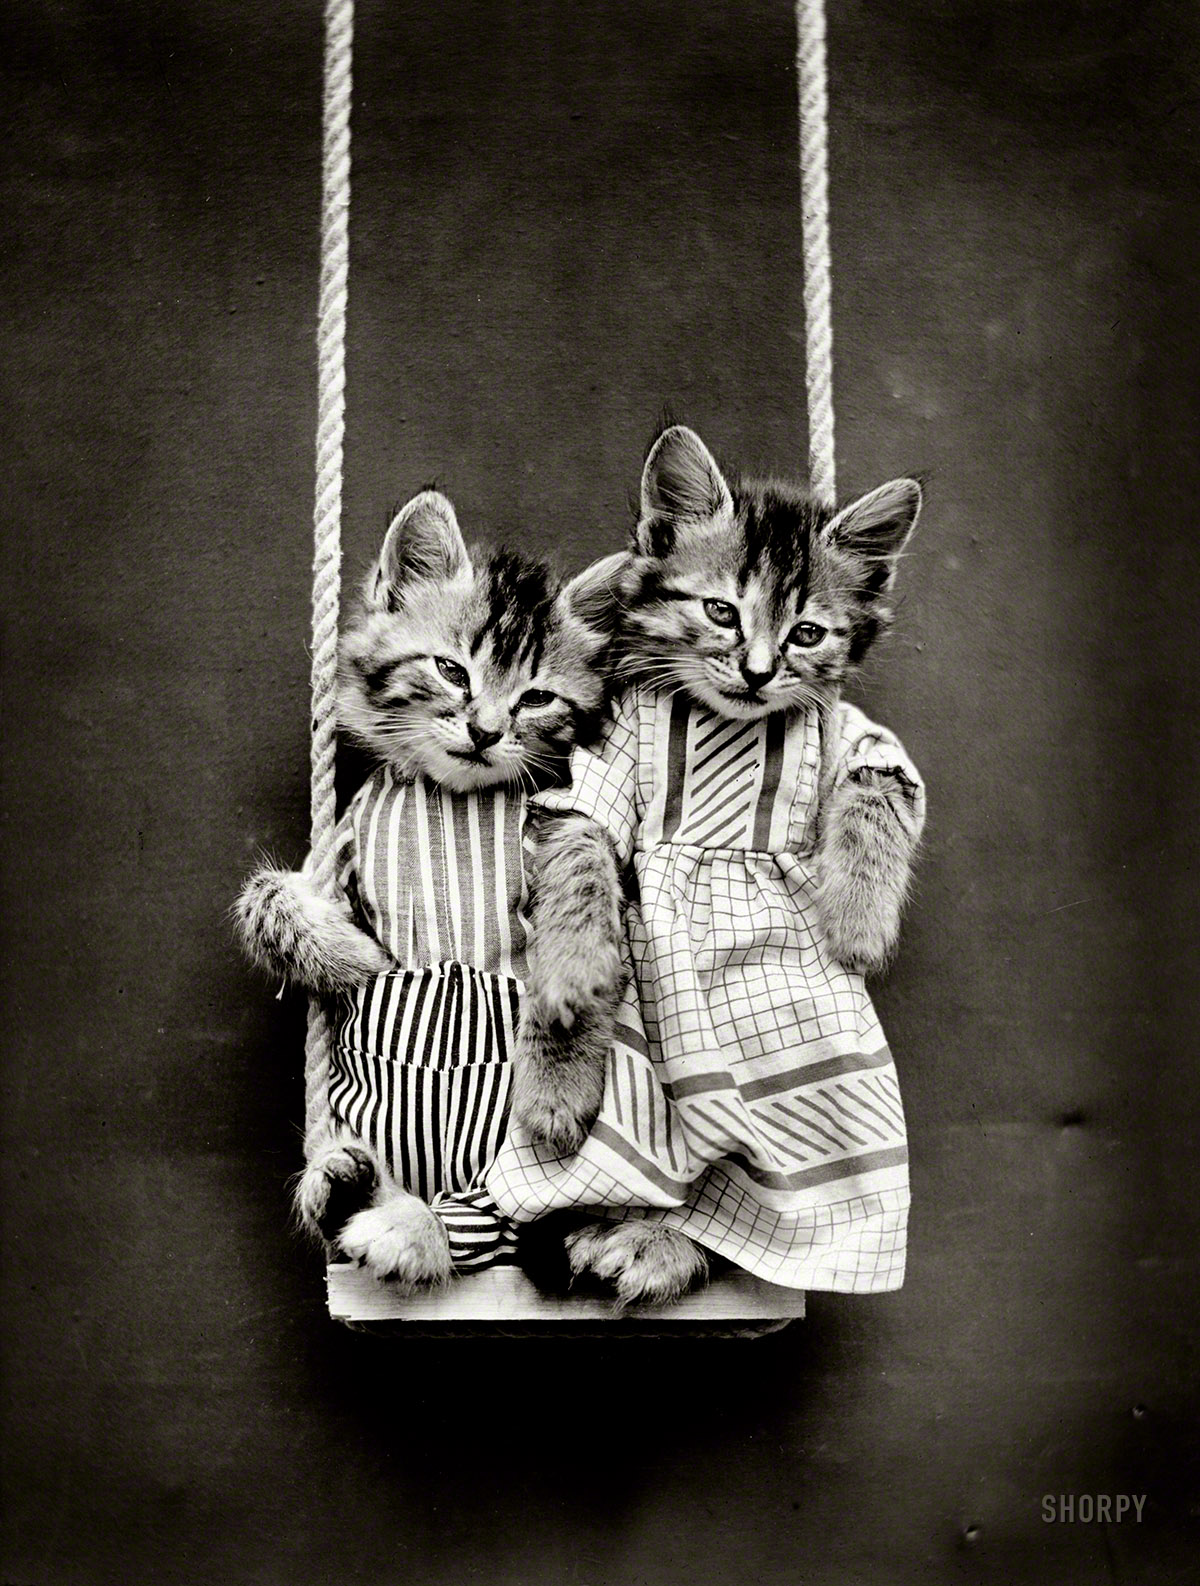 1914. "Two kittens in costume on swing." Posed by Harry W. Frees, founding father of photographic feline anthropomorphism. View full size.